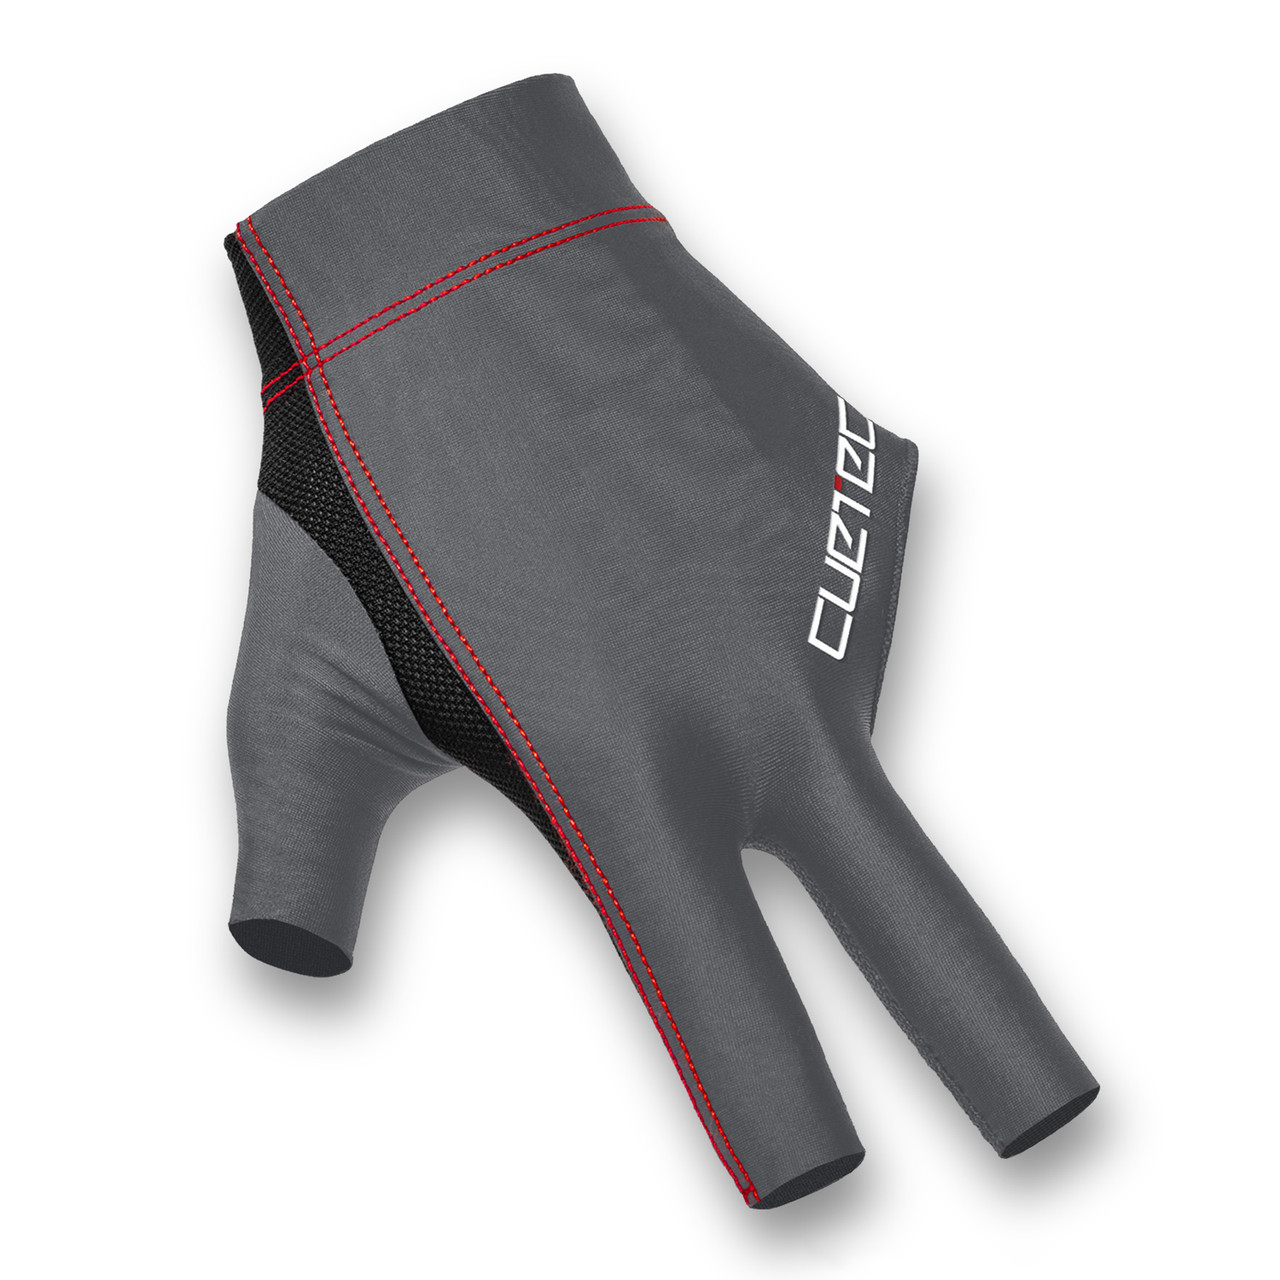 Cuetec Axis High Performance Pool Glove - Left Hand - FCI Billiards